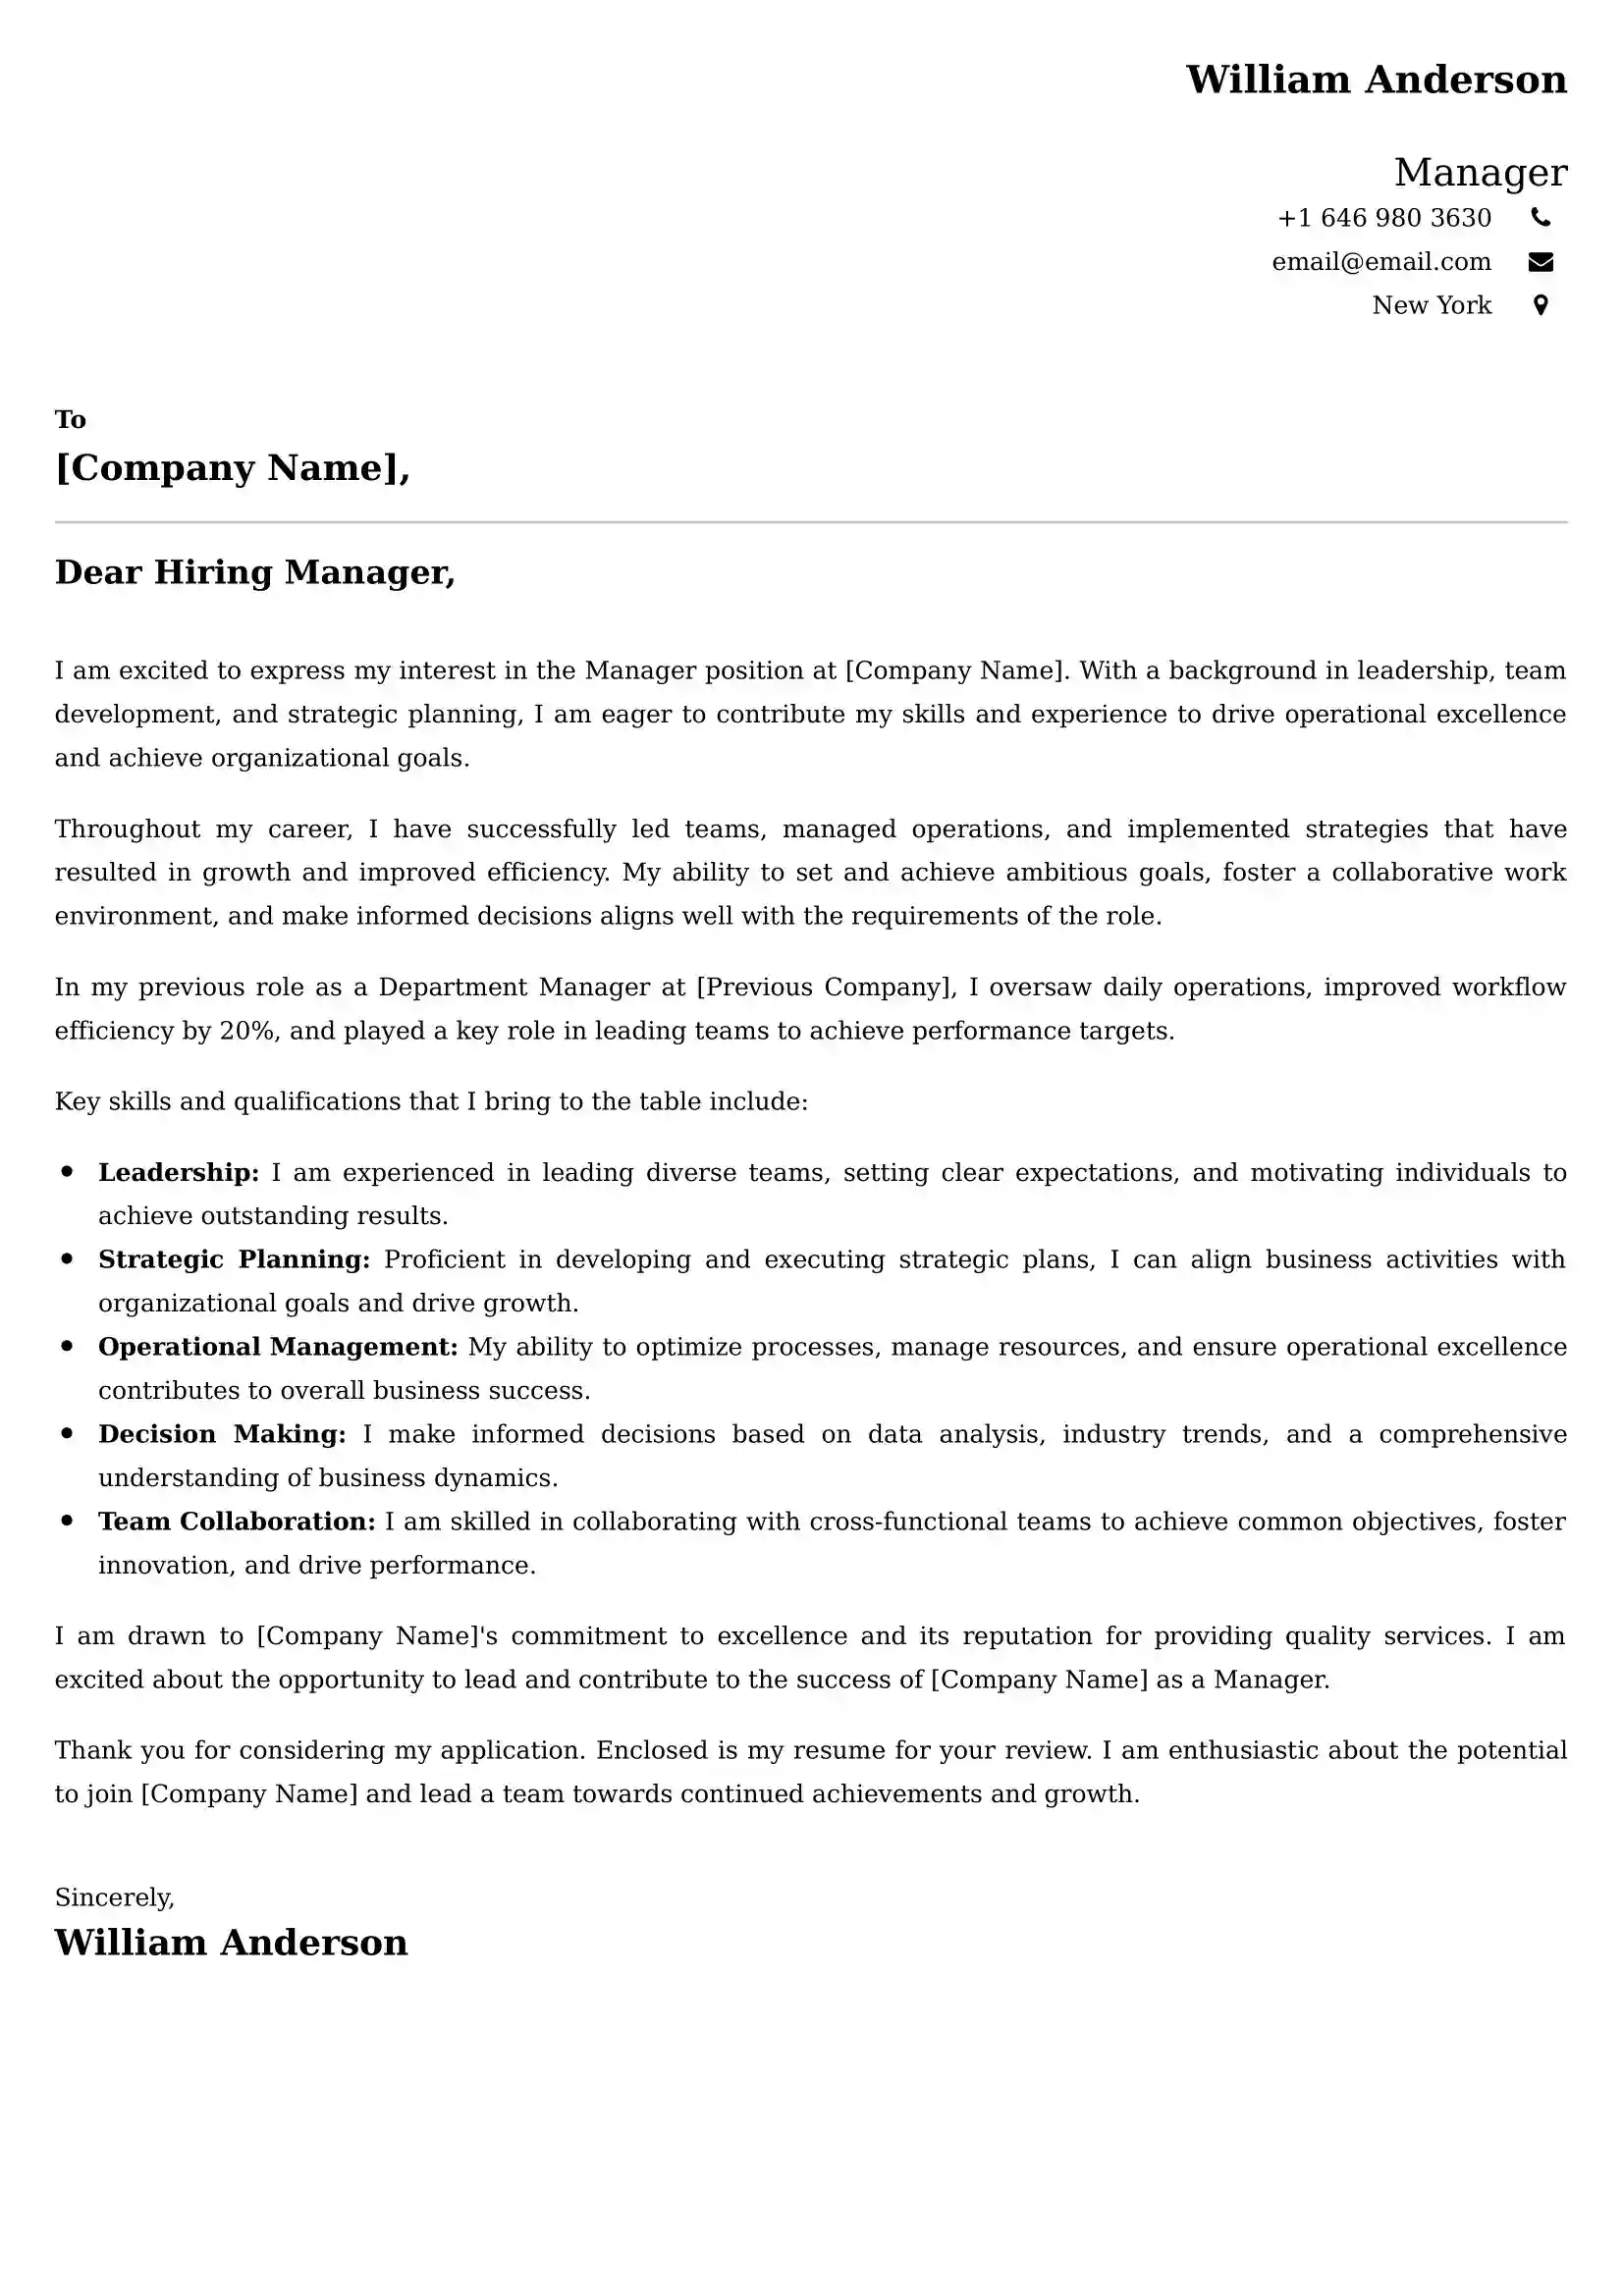 Manager Cover Letter Examples -Latest Brazilian Templates